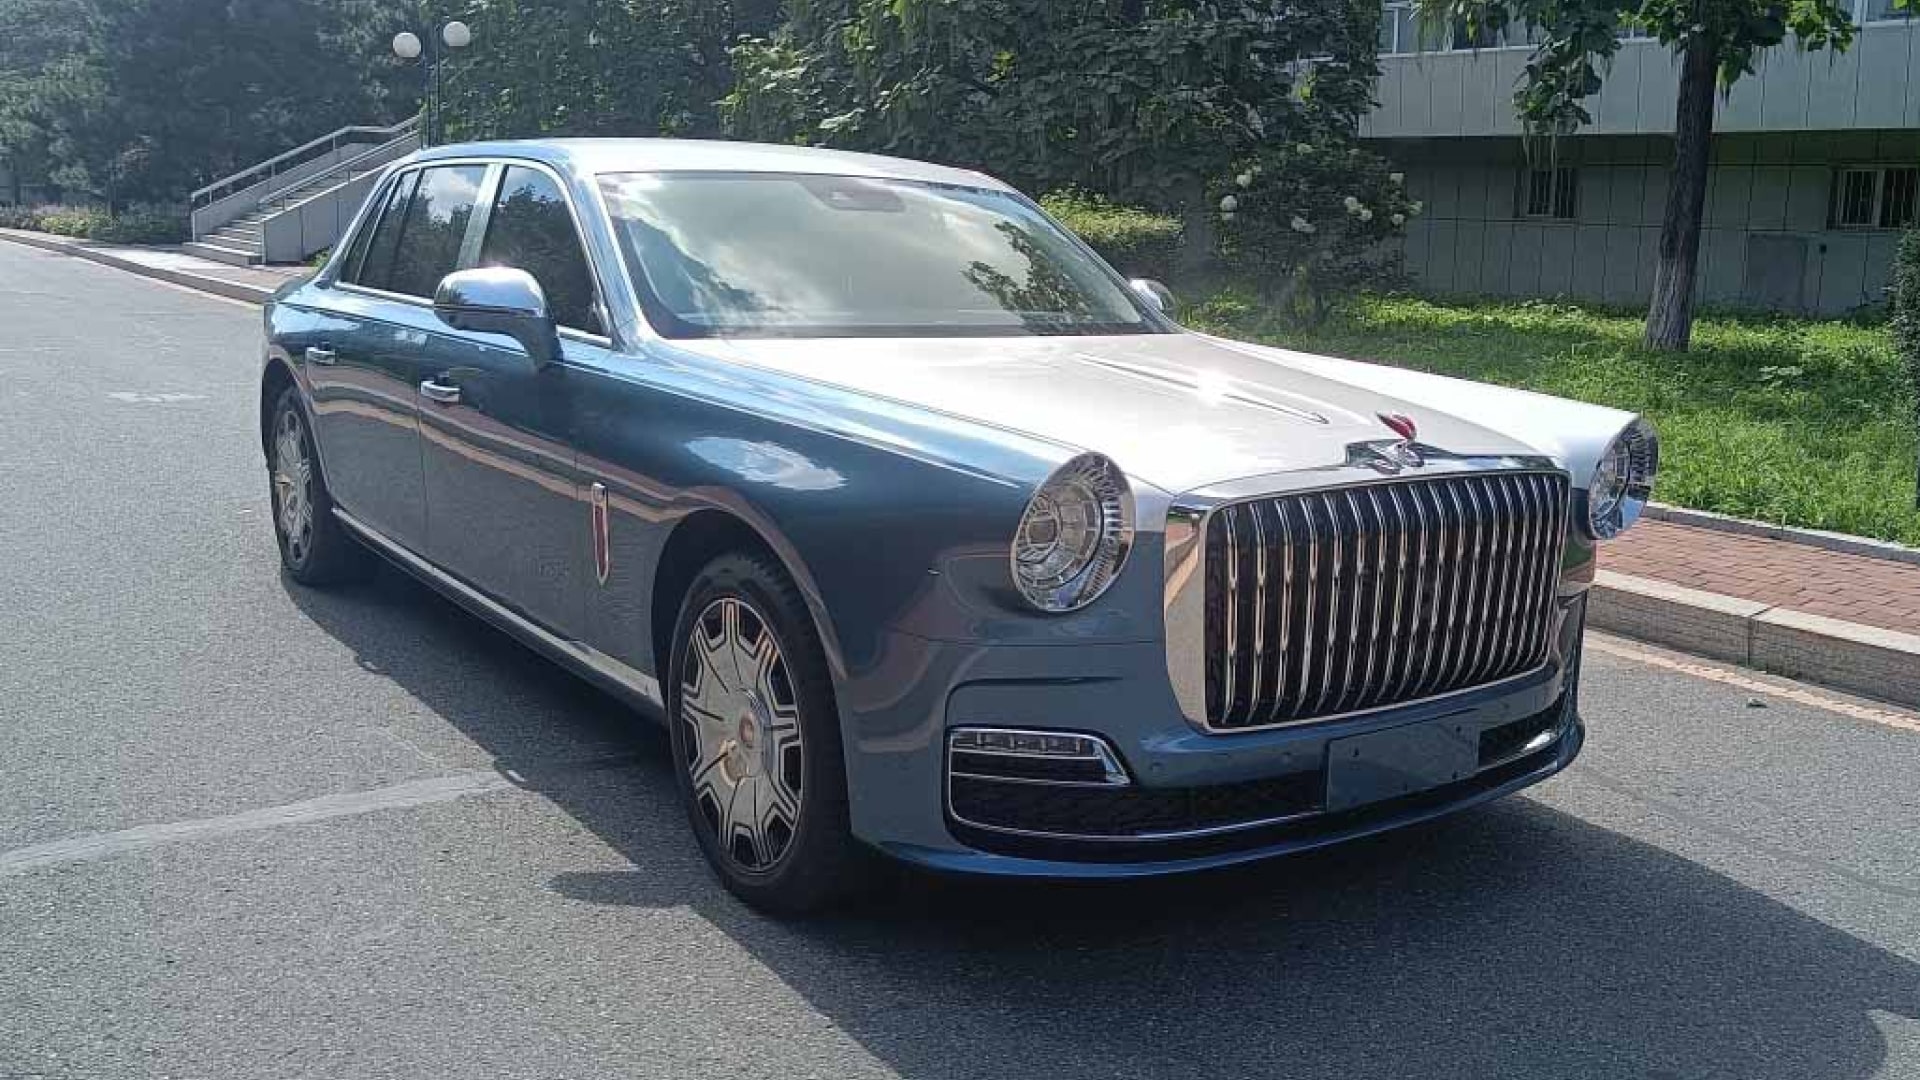 Hongqi L5 6-meter sedan for 680,000 USD is ready for mass production in China